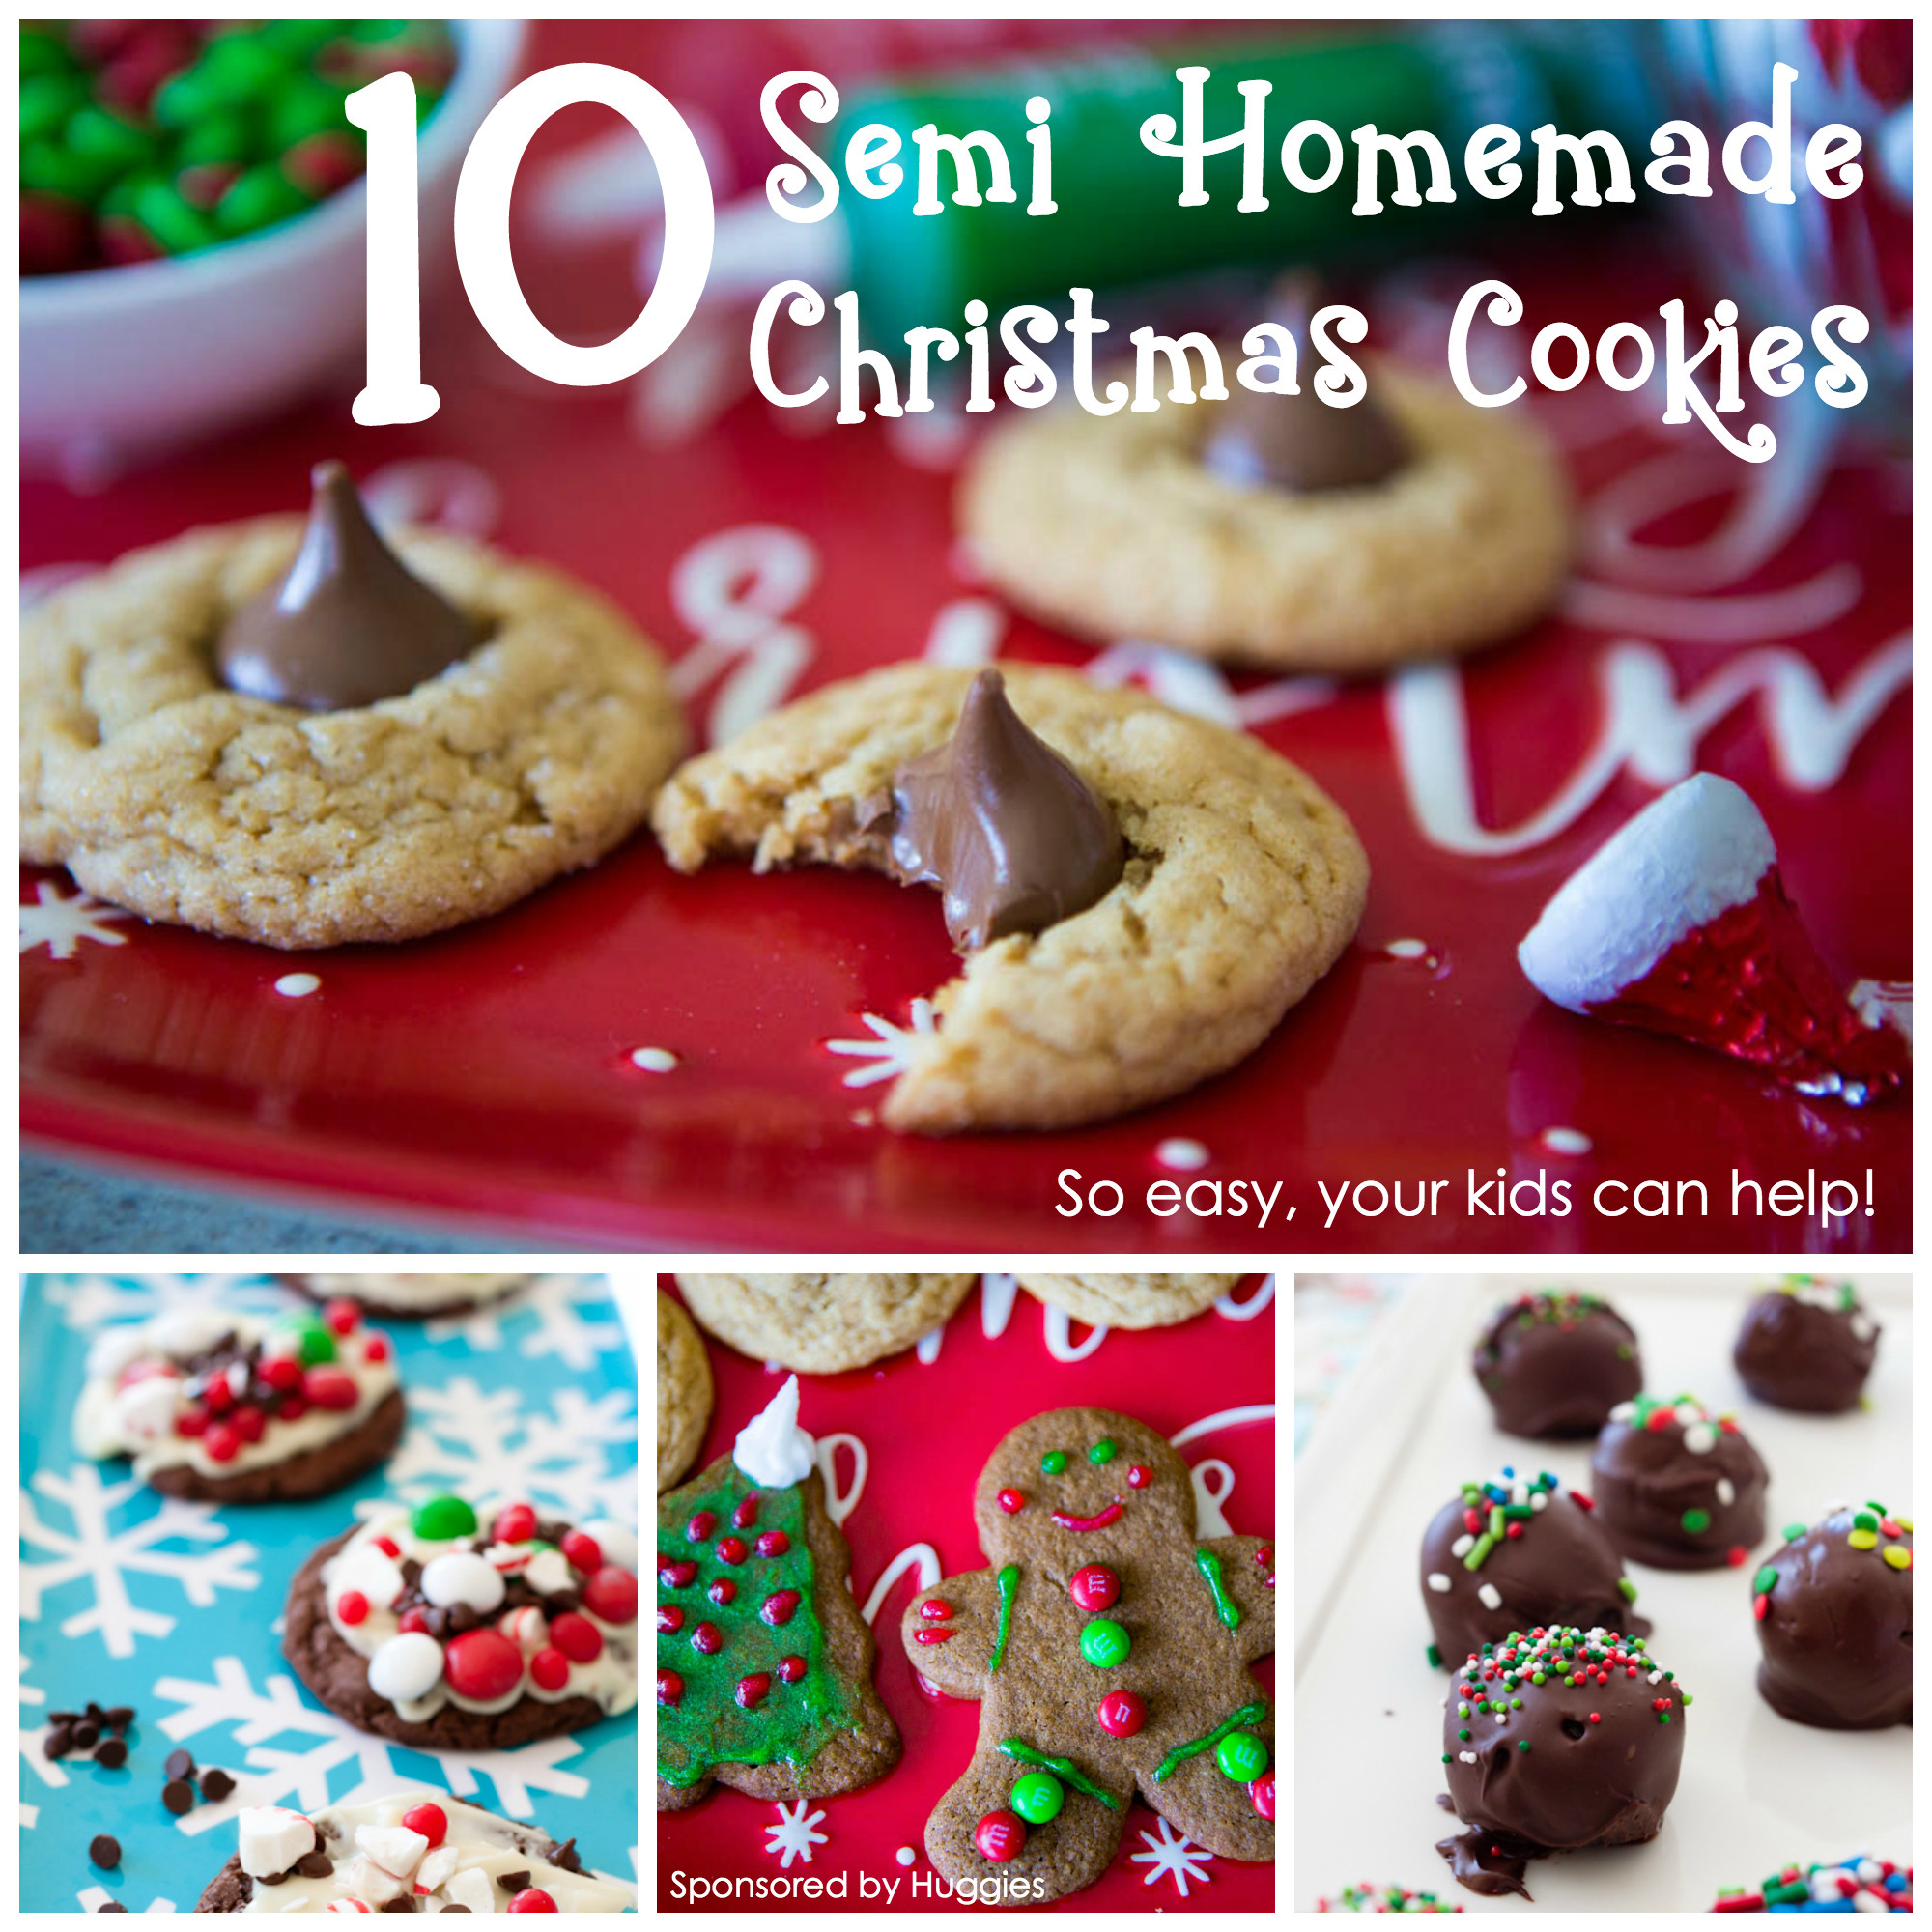 Easy Homemade Christmas Cookies
 10 semi homemade Christmas cookies that will save your sanity